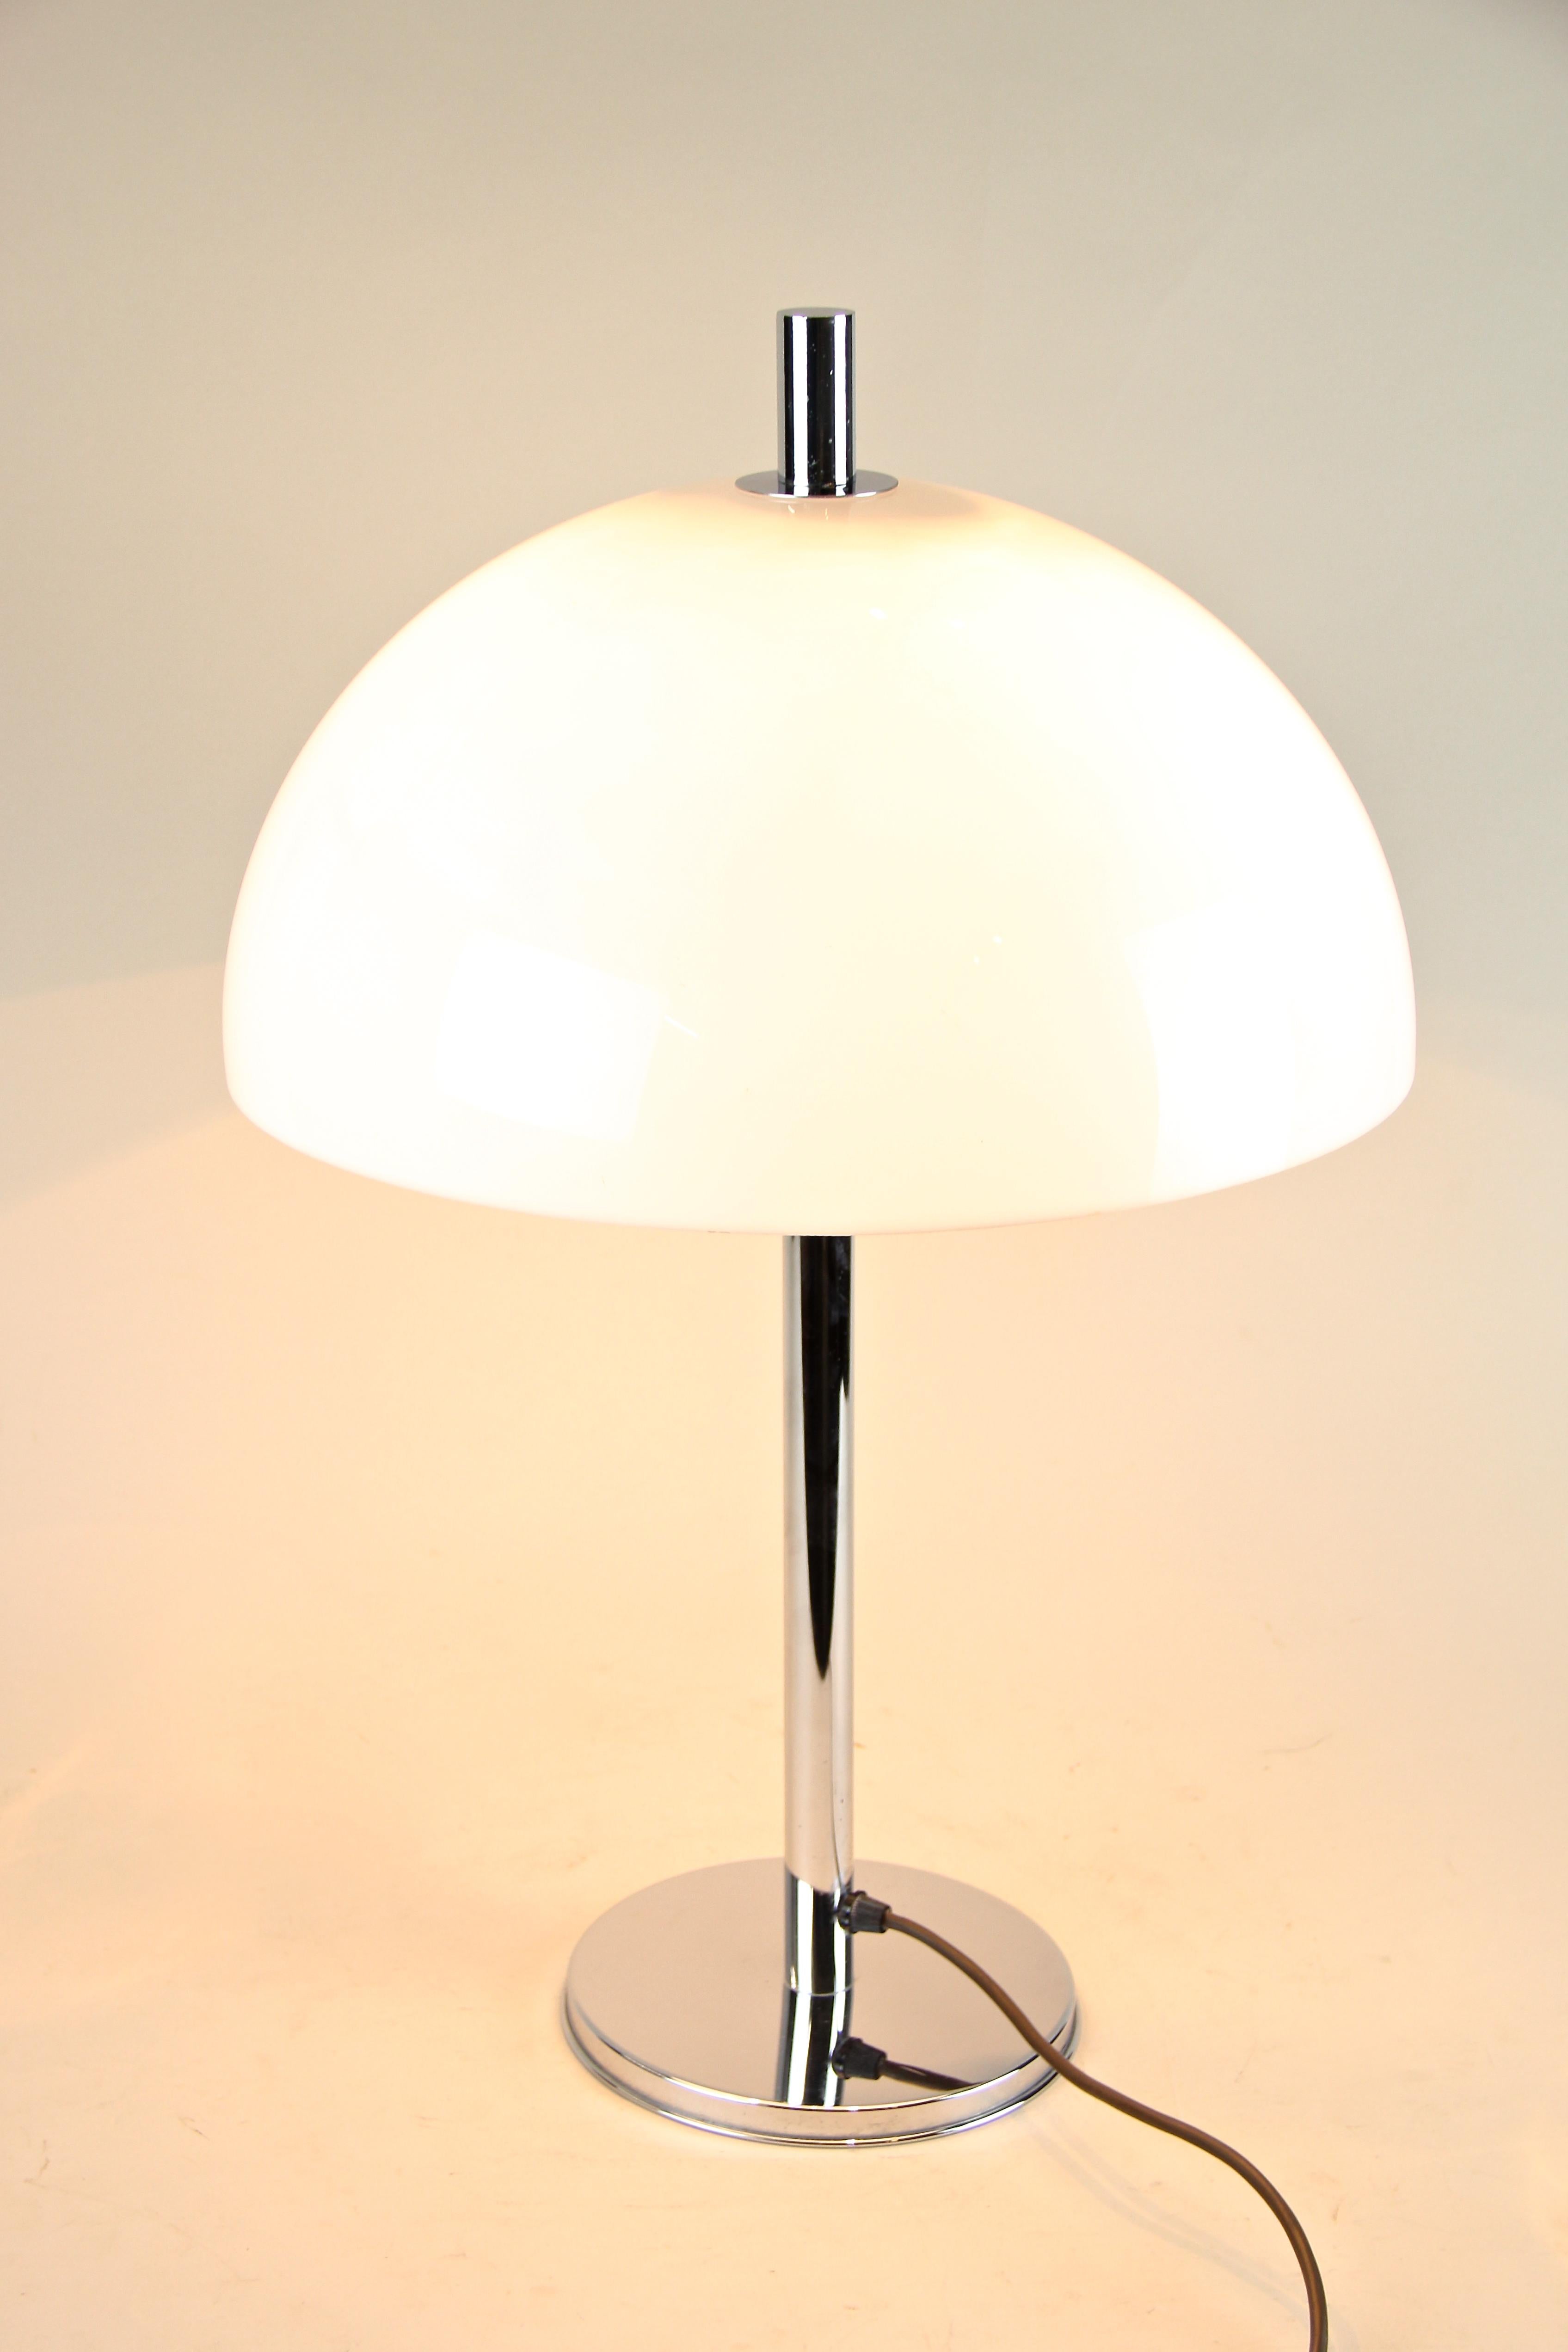 Timeless designed table lamp by Boyer Leuchten Vienna from the 1970s. This beautiful midcentury piece of lightning comes with a great shaped white lampshade in the form of a mushroom sitting on a chromed metal stand. A simple but fantastic design